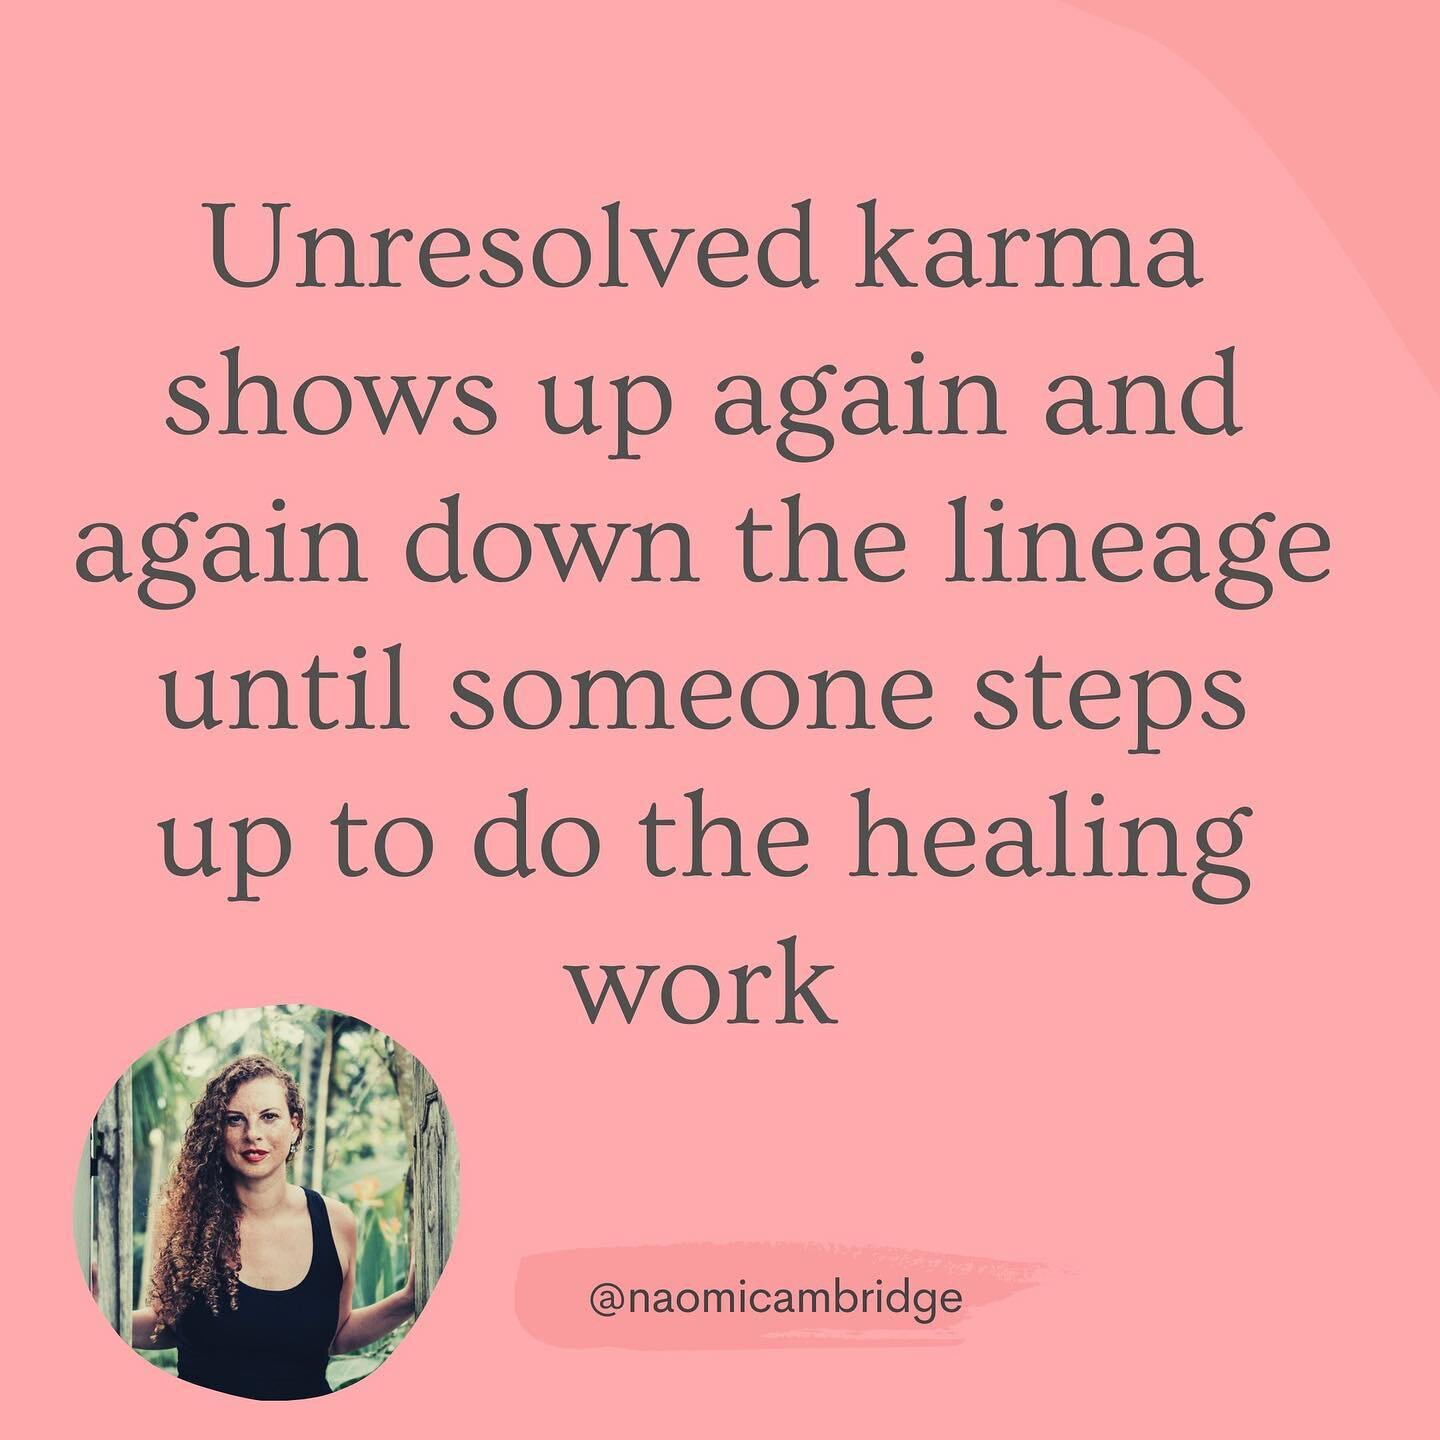 ⚡️Unresolved karma shows up again and again down the lineage until someone steps up to do the healing work ⚡️